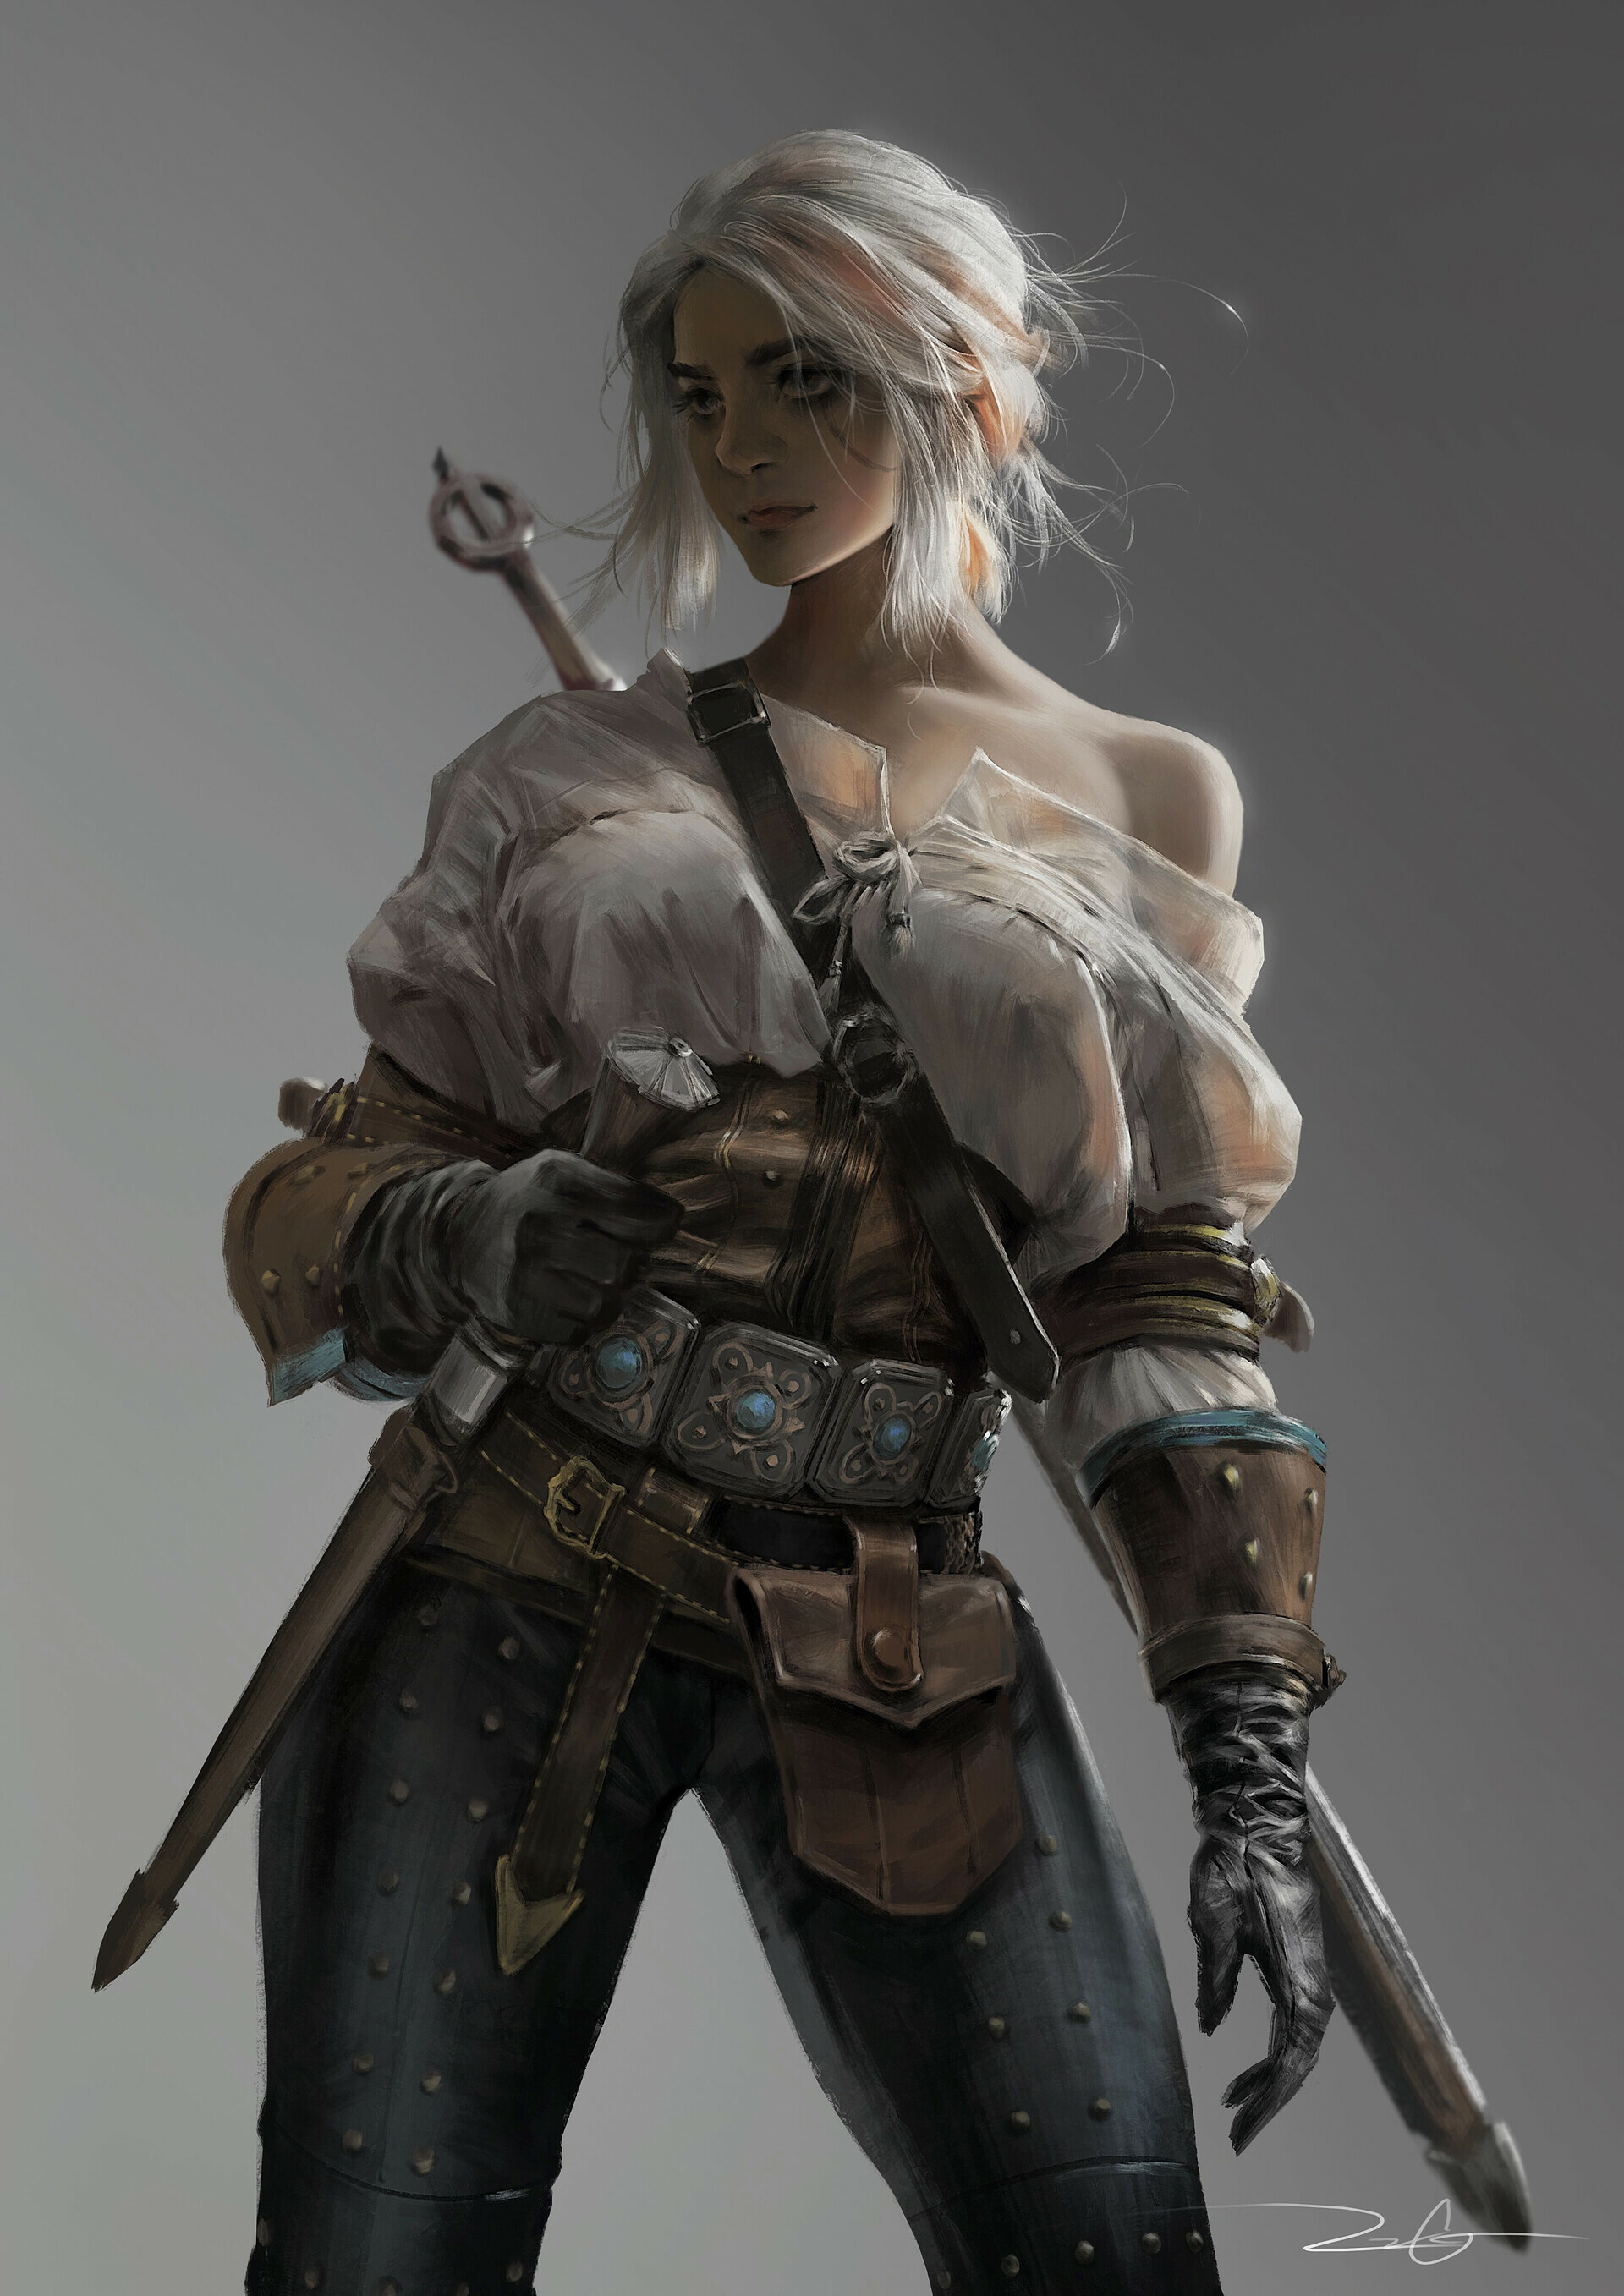 The Witcher (Game): Cirilla Fiona Elen Riannon, Known as Ciri, the Lady of Time and Space and princess of Cintra. 1920x2720 HD Background.